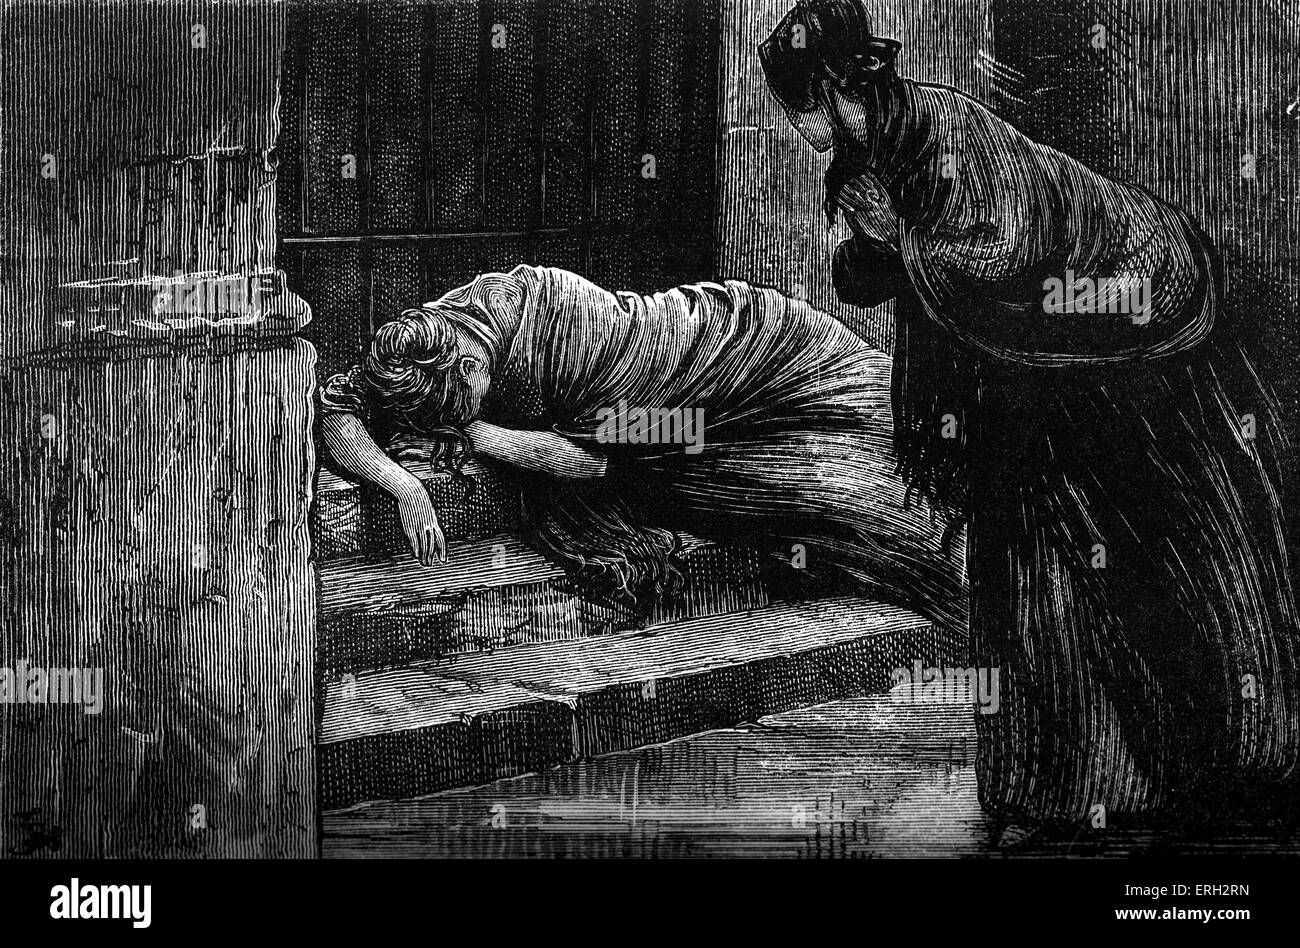 Bleak House by Charles Dickens. Caption reads:'She lay there, with one arm creeping round a bar of the iron gate, and seeming to embrace it.' CD: English novelist, 7 February 1812 – 9 June 1870. Stock Photo